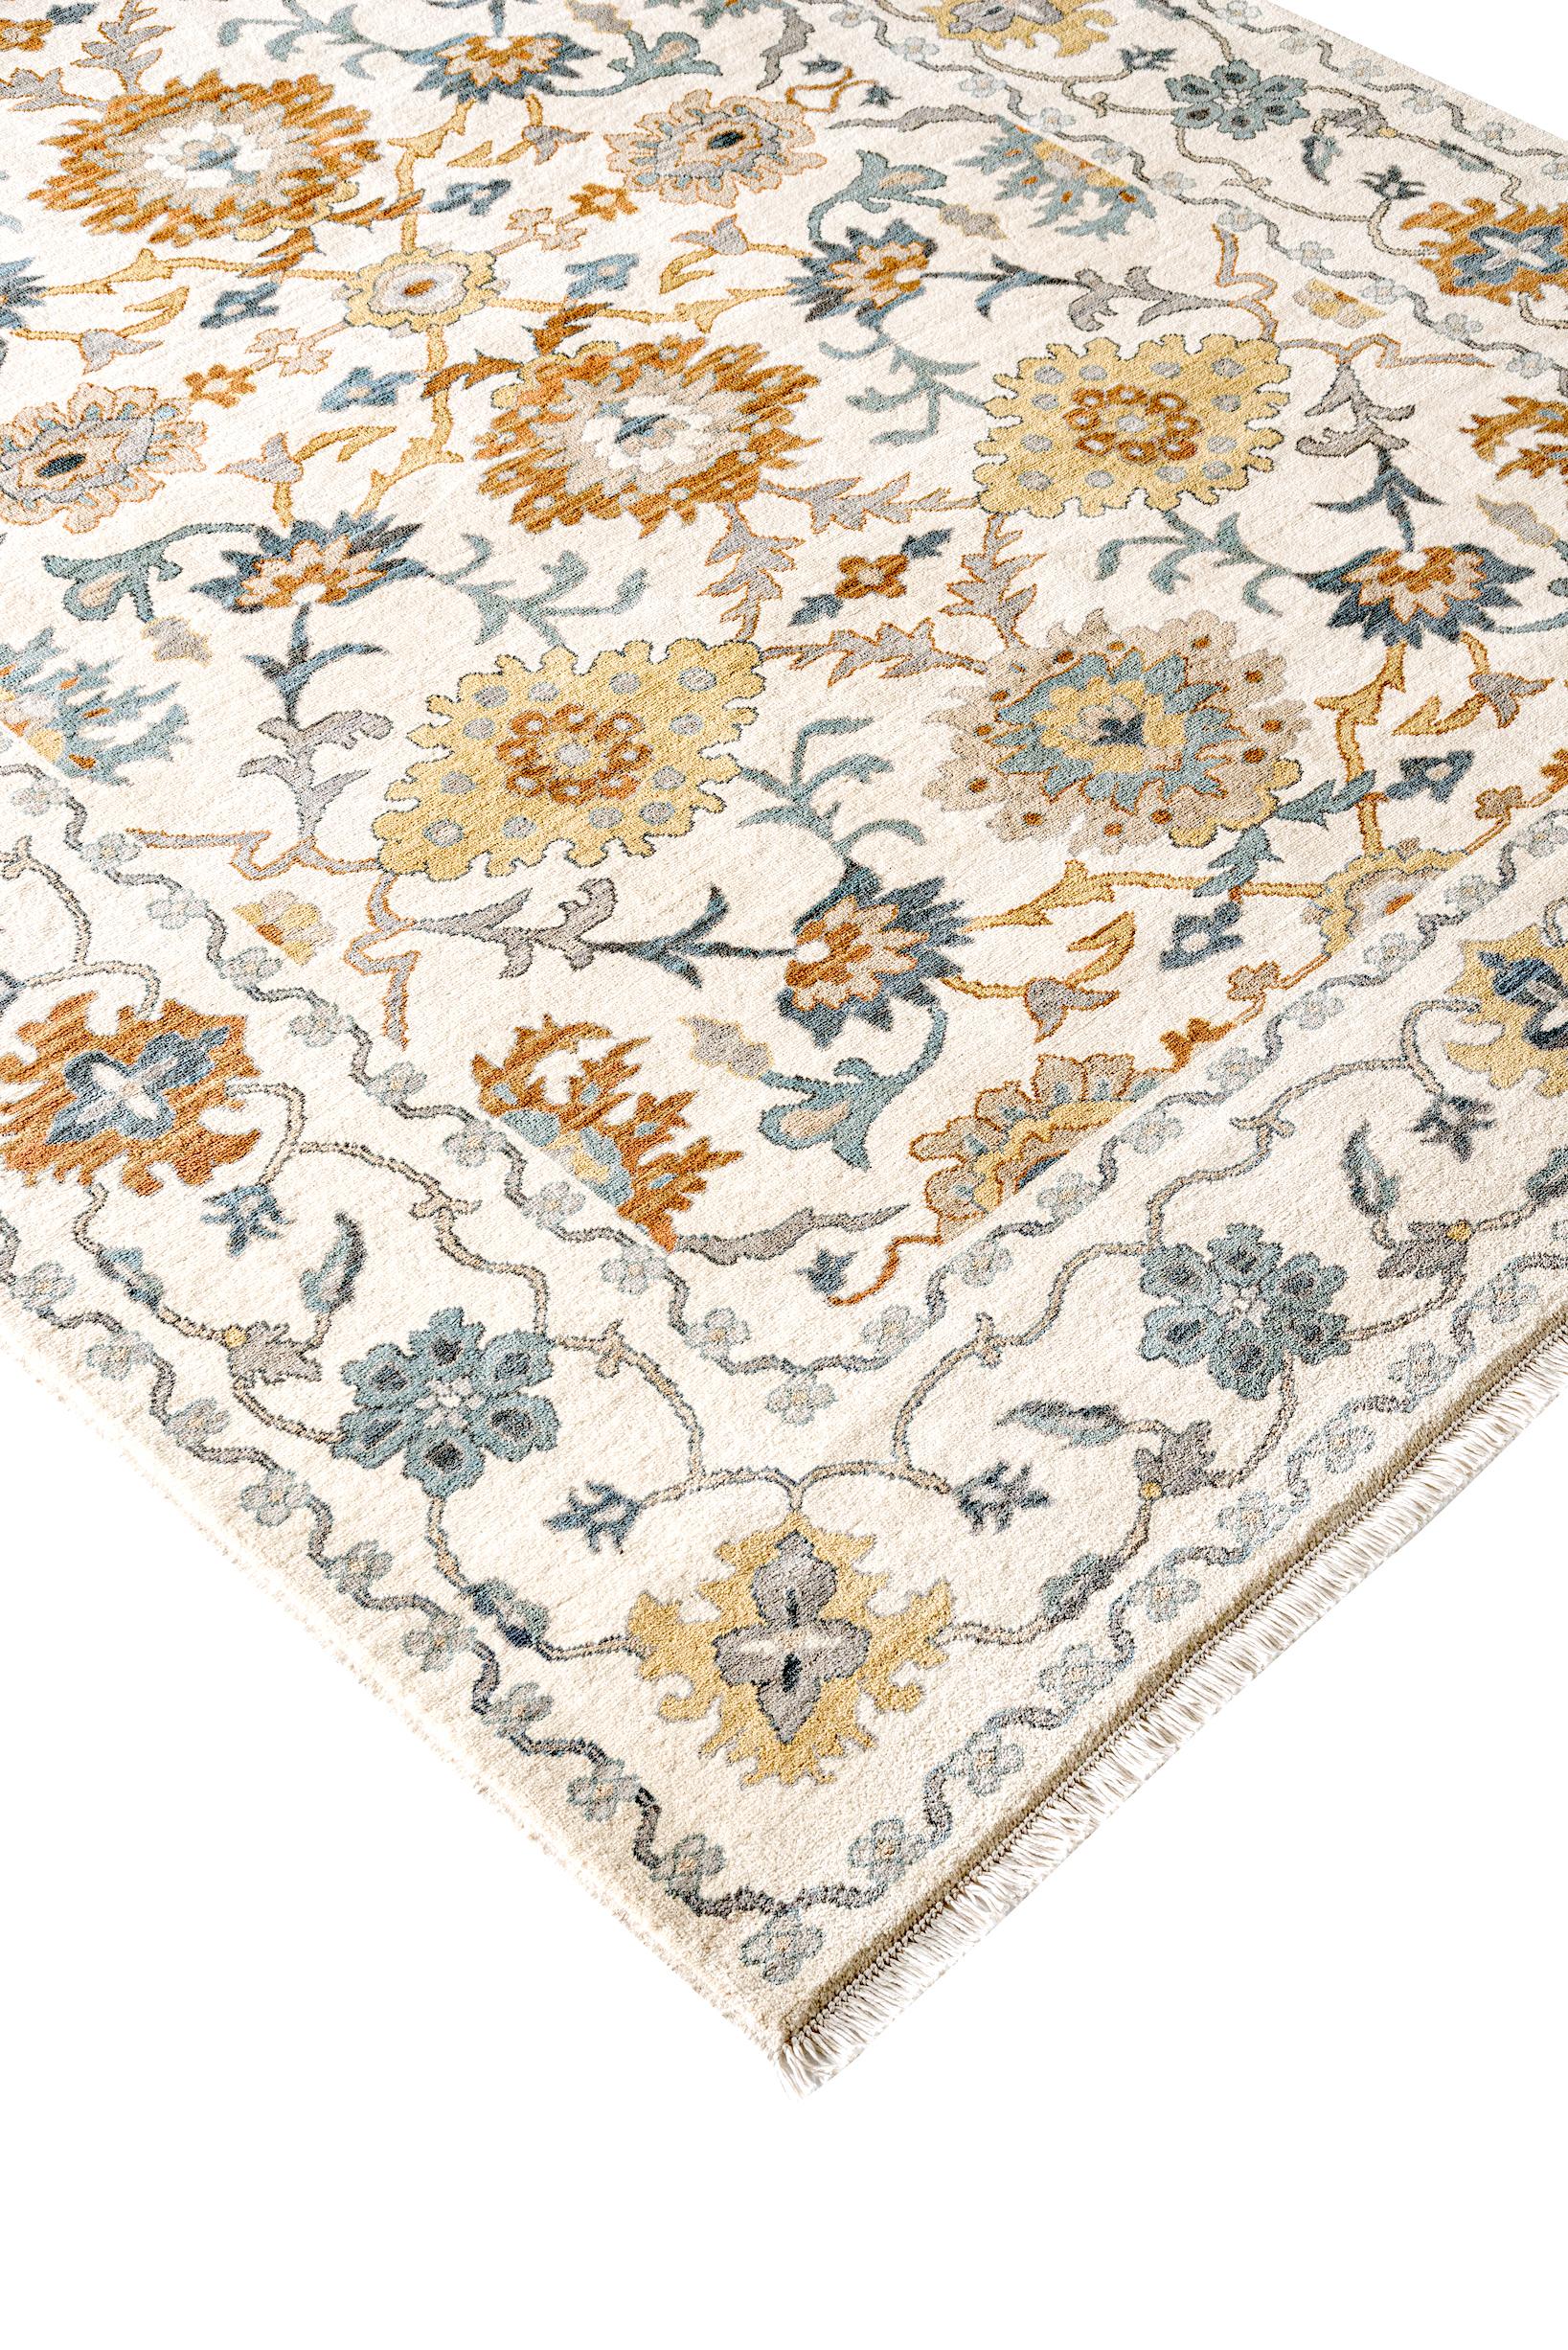 Contemporary 21st Century Hand-Knotted Egyptian Ziegler Rug in Beige Blue Floral Pattern For Sale